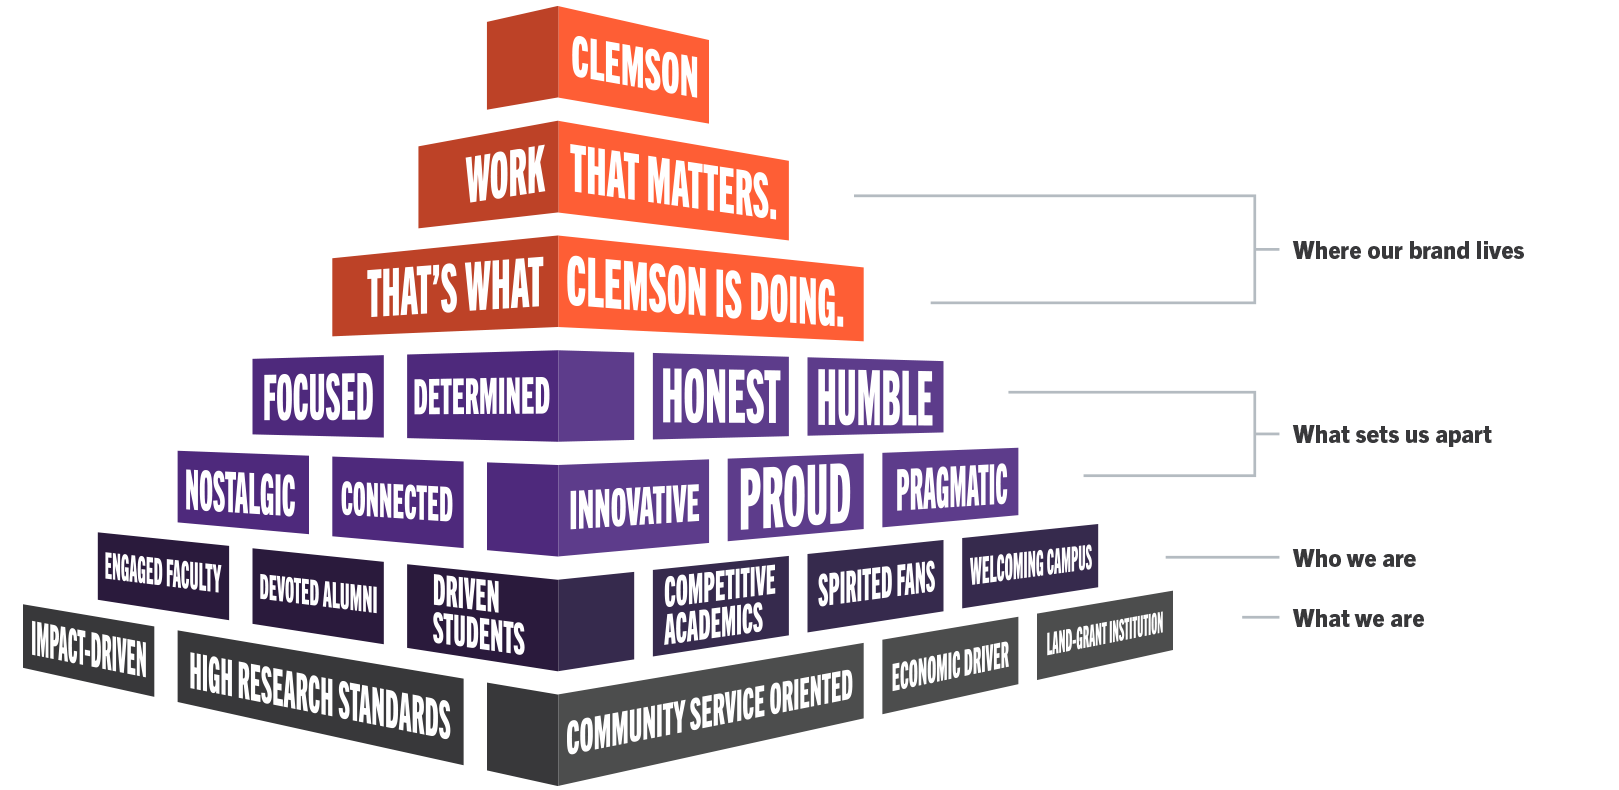 A pyramid that details where Clemson's brand lives, what sets us apart, who we are and what we are to illustrate the Clemson brand story.